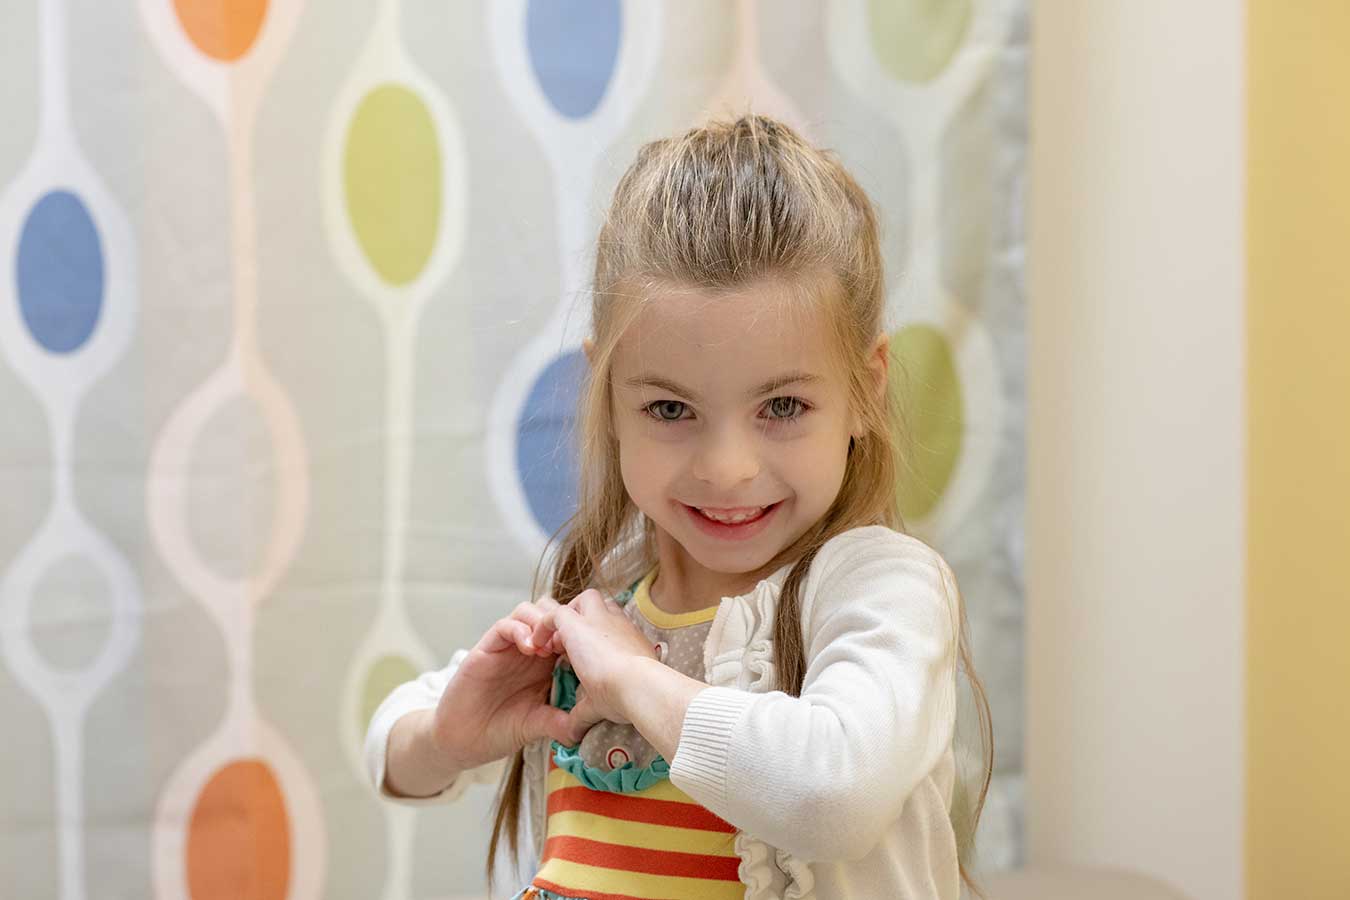 Seattle Children's Heart Center patient makes a heart shape with her hands.